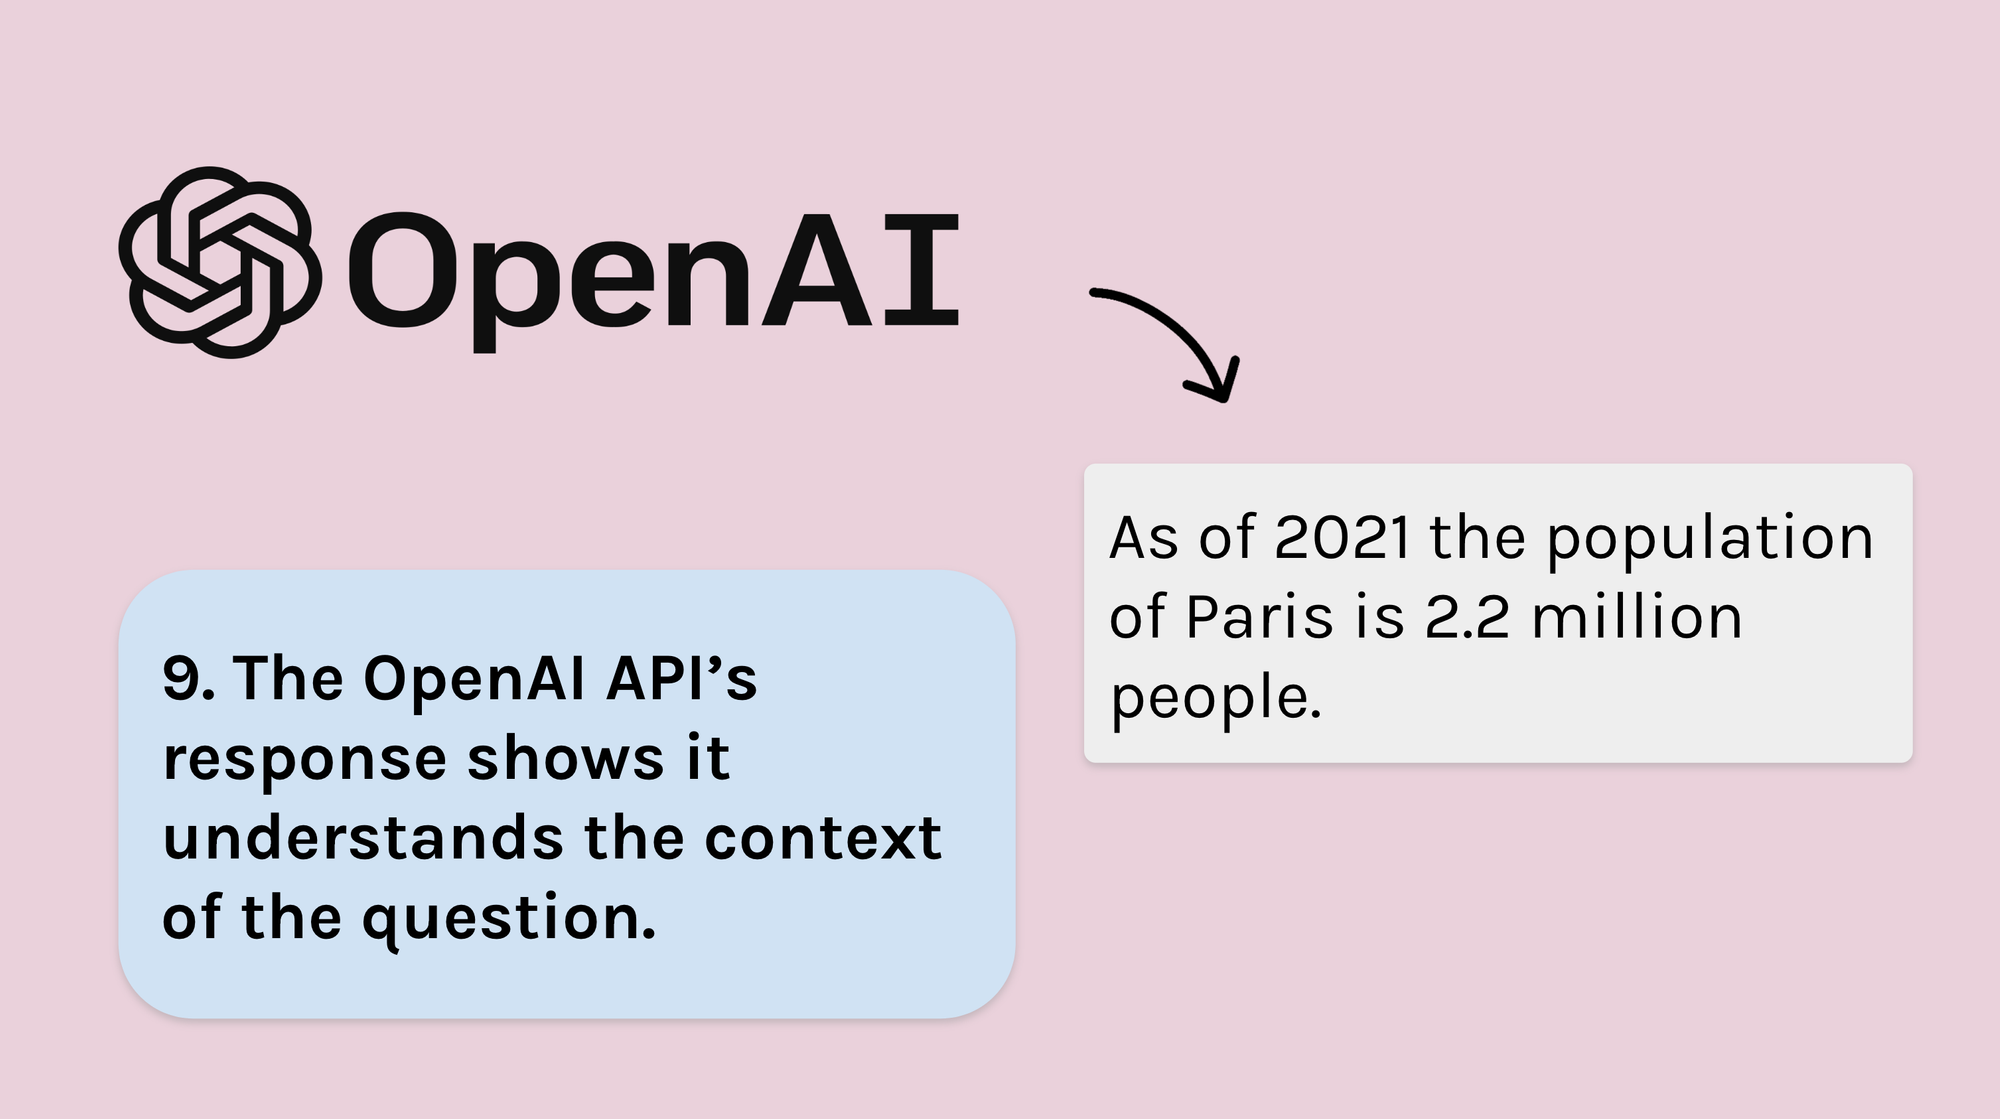 9. The OpenAI API’s response shows it understands the context of the question.